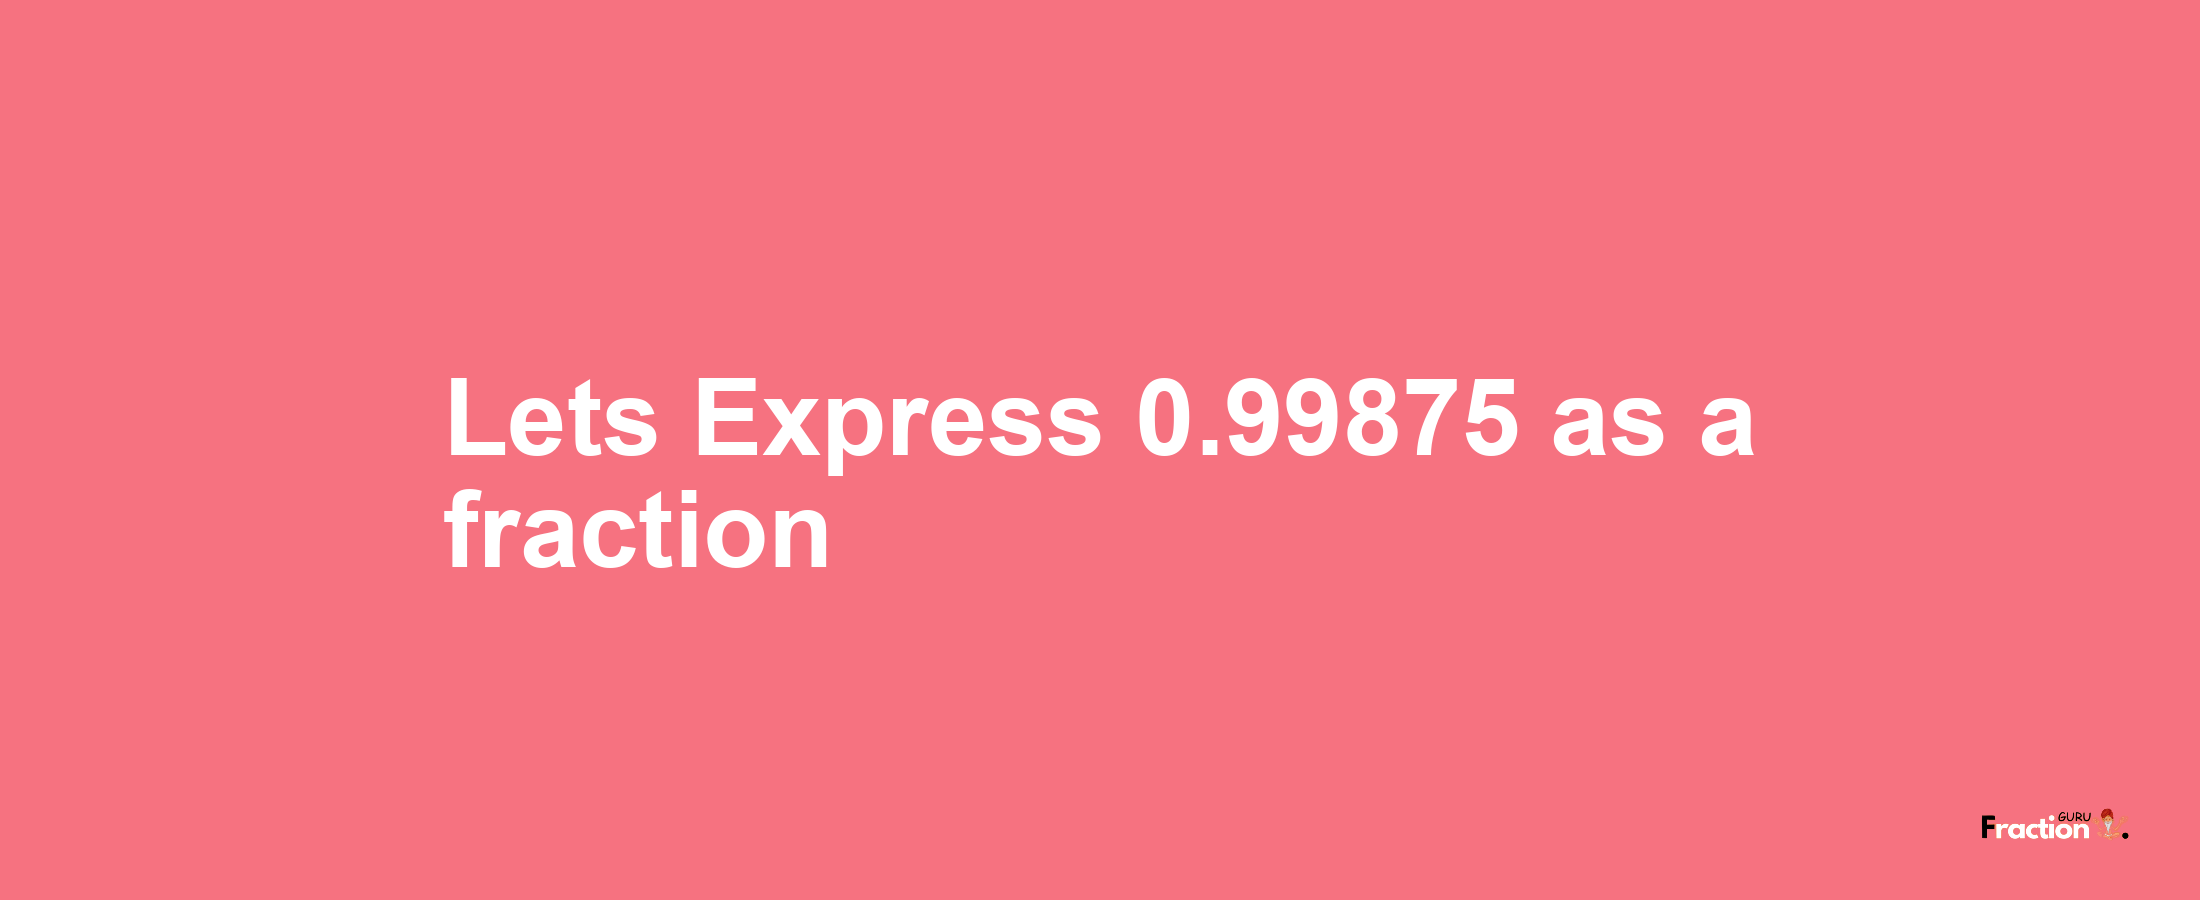 Lets Express 0.99875 as afraction